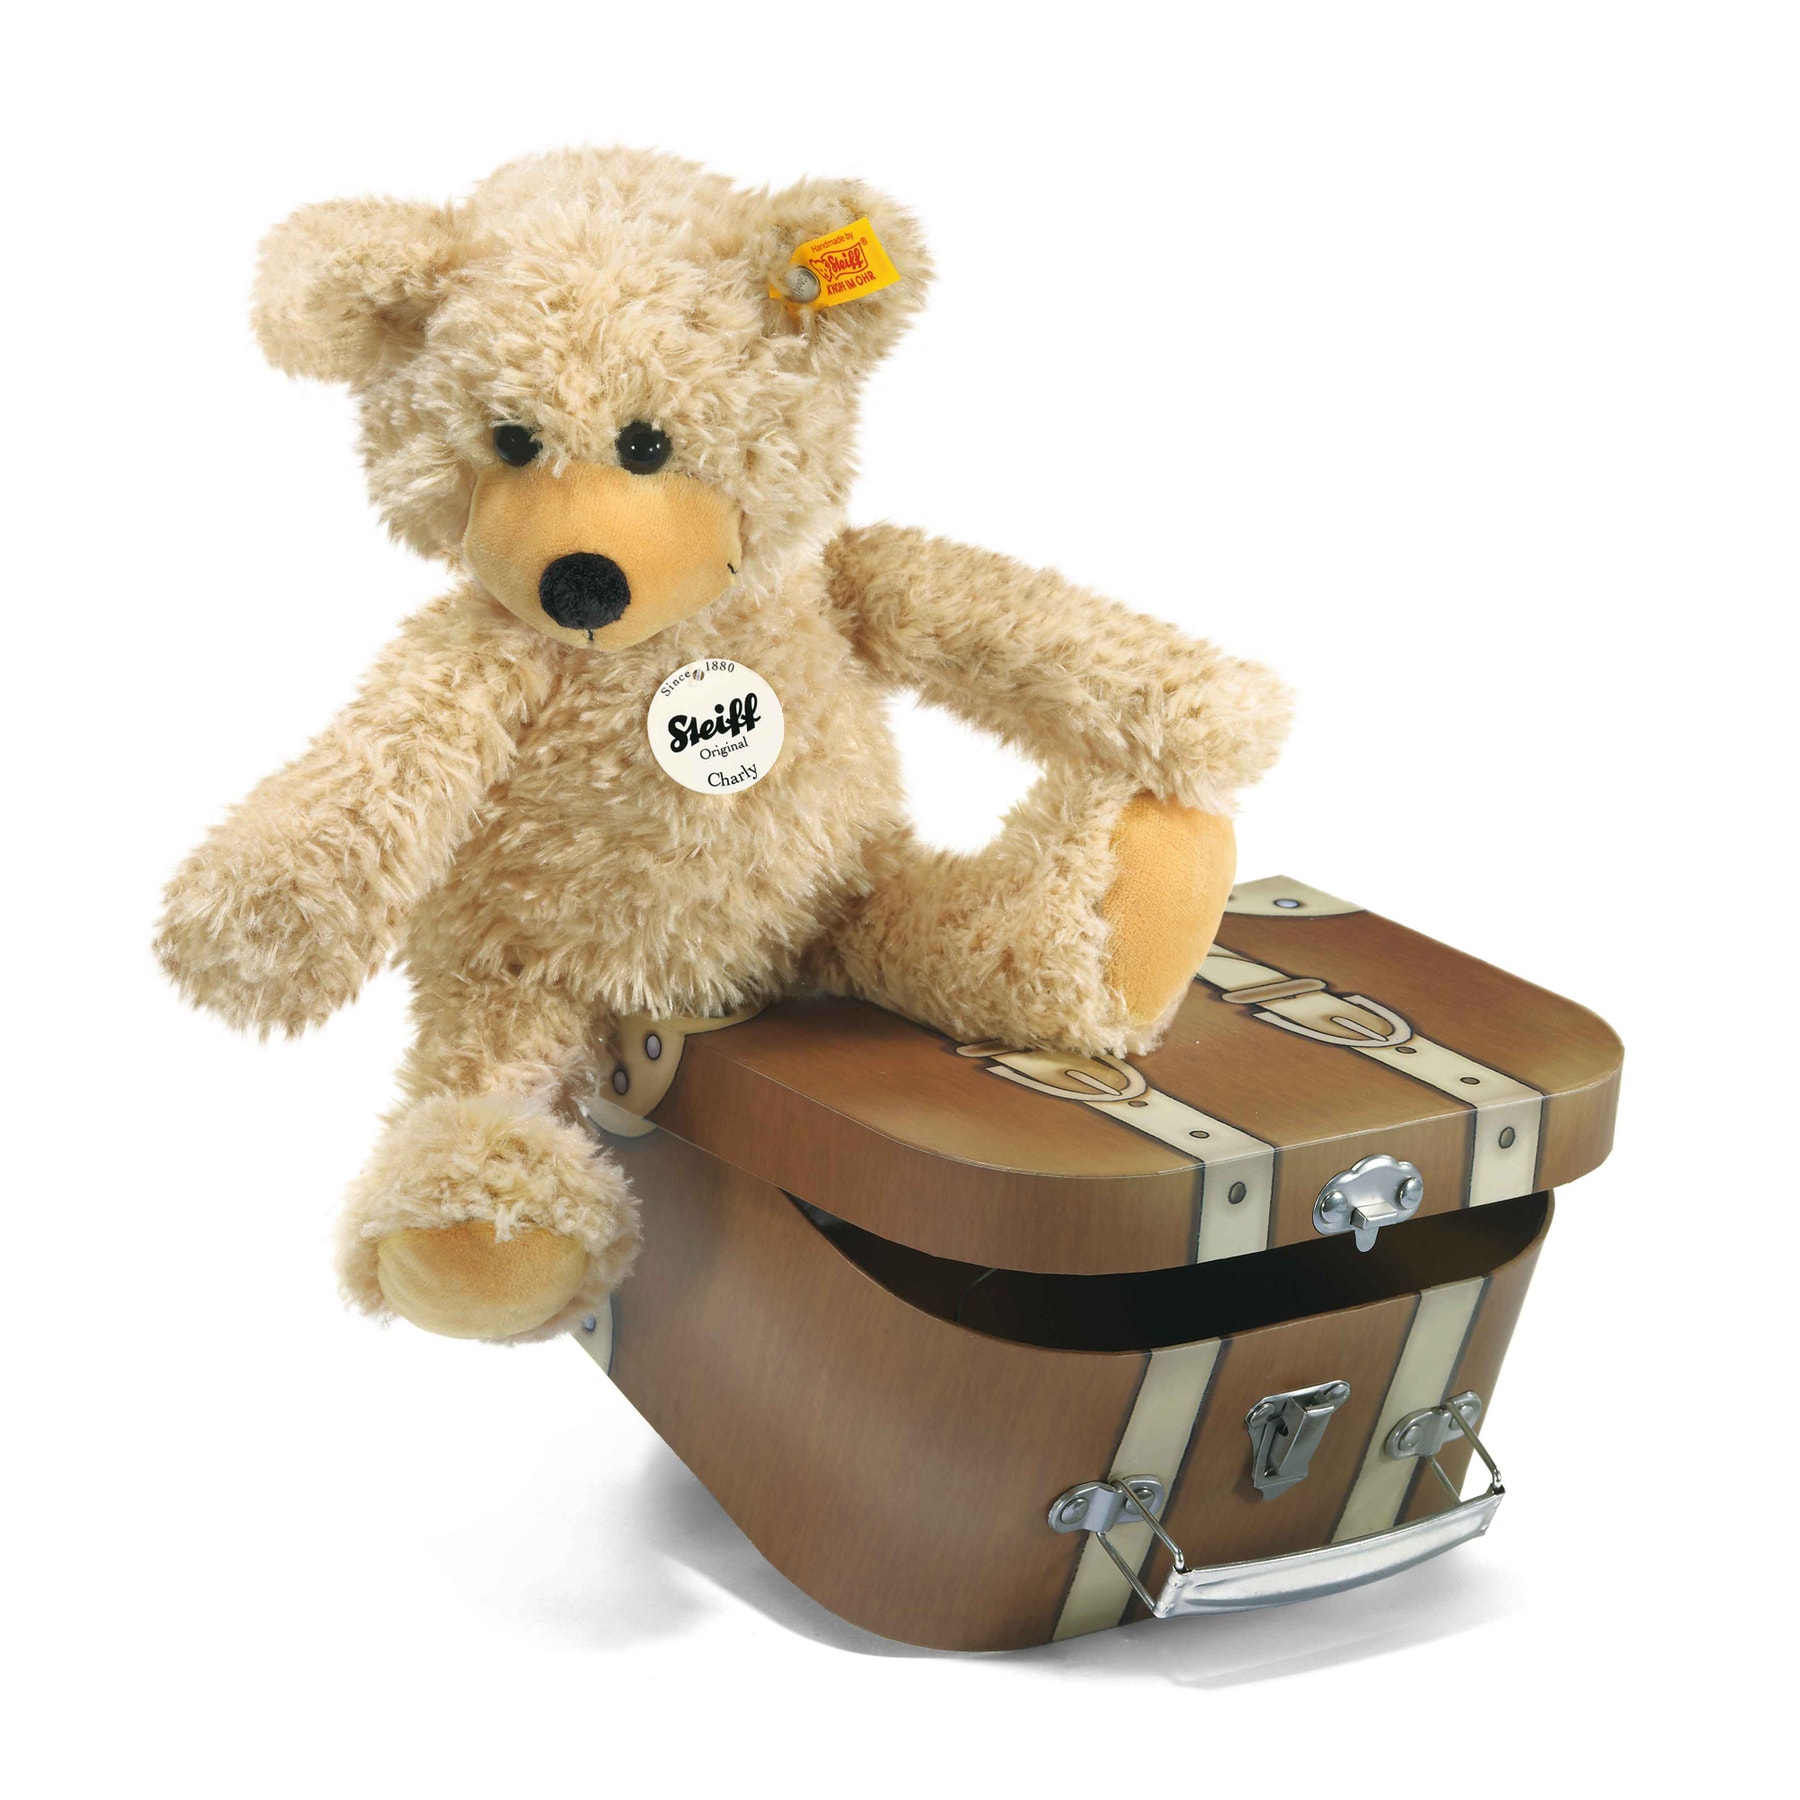 Charly dangling Teddy bear in suitcase